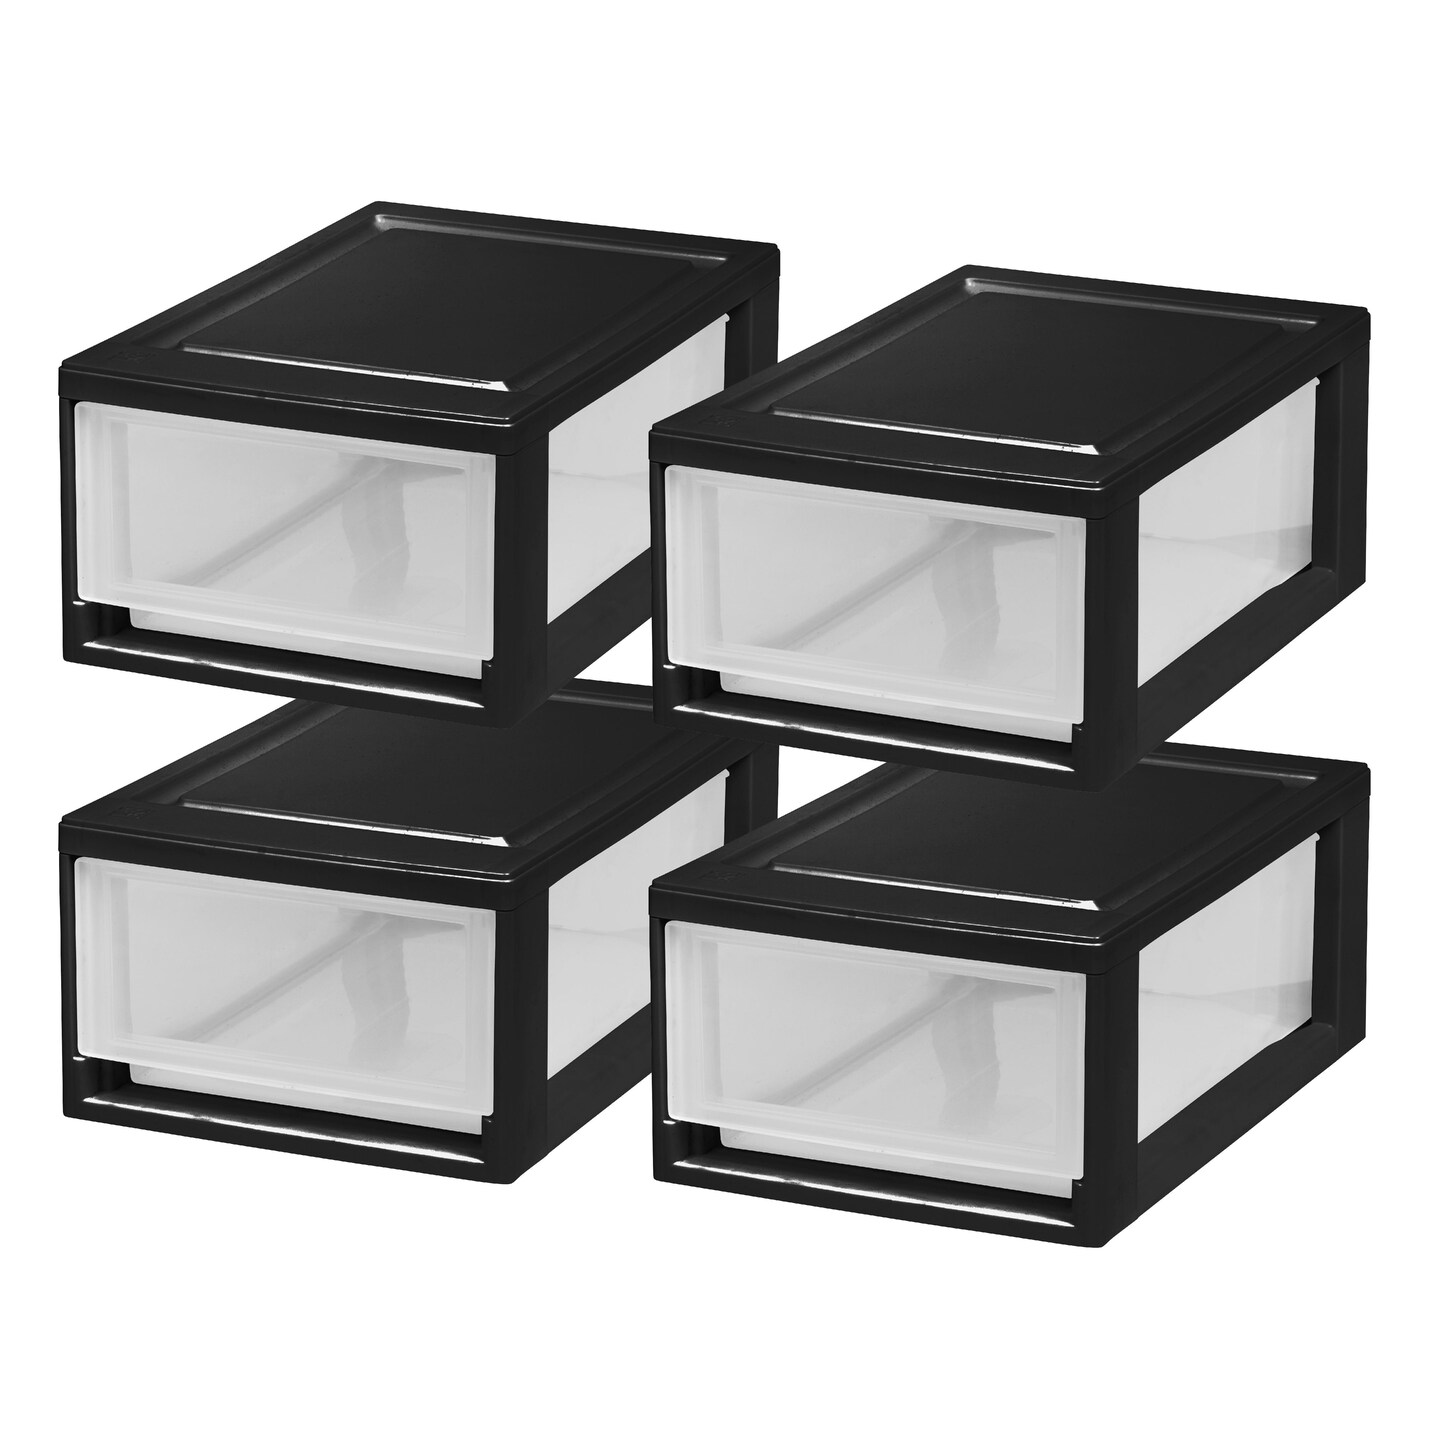 IRIS USA 4 Pack 6qt Plastic Compact Stackable Storage Drawers, Black/White